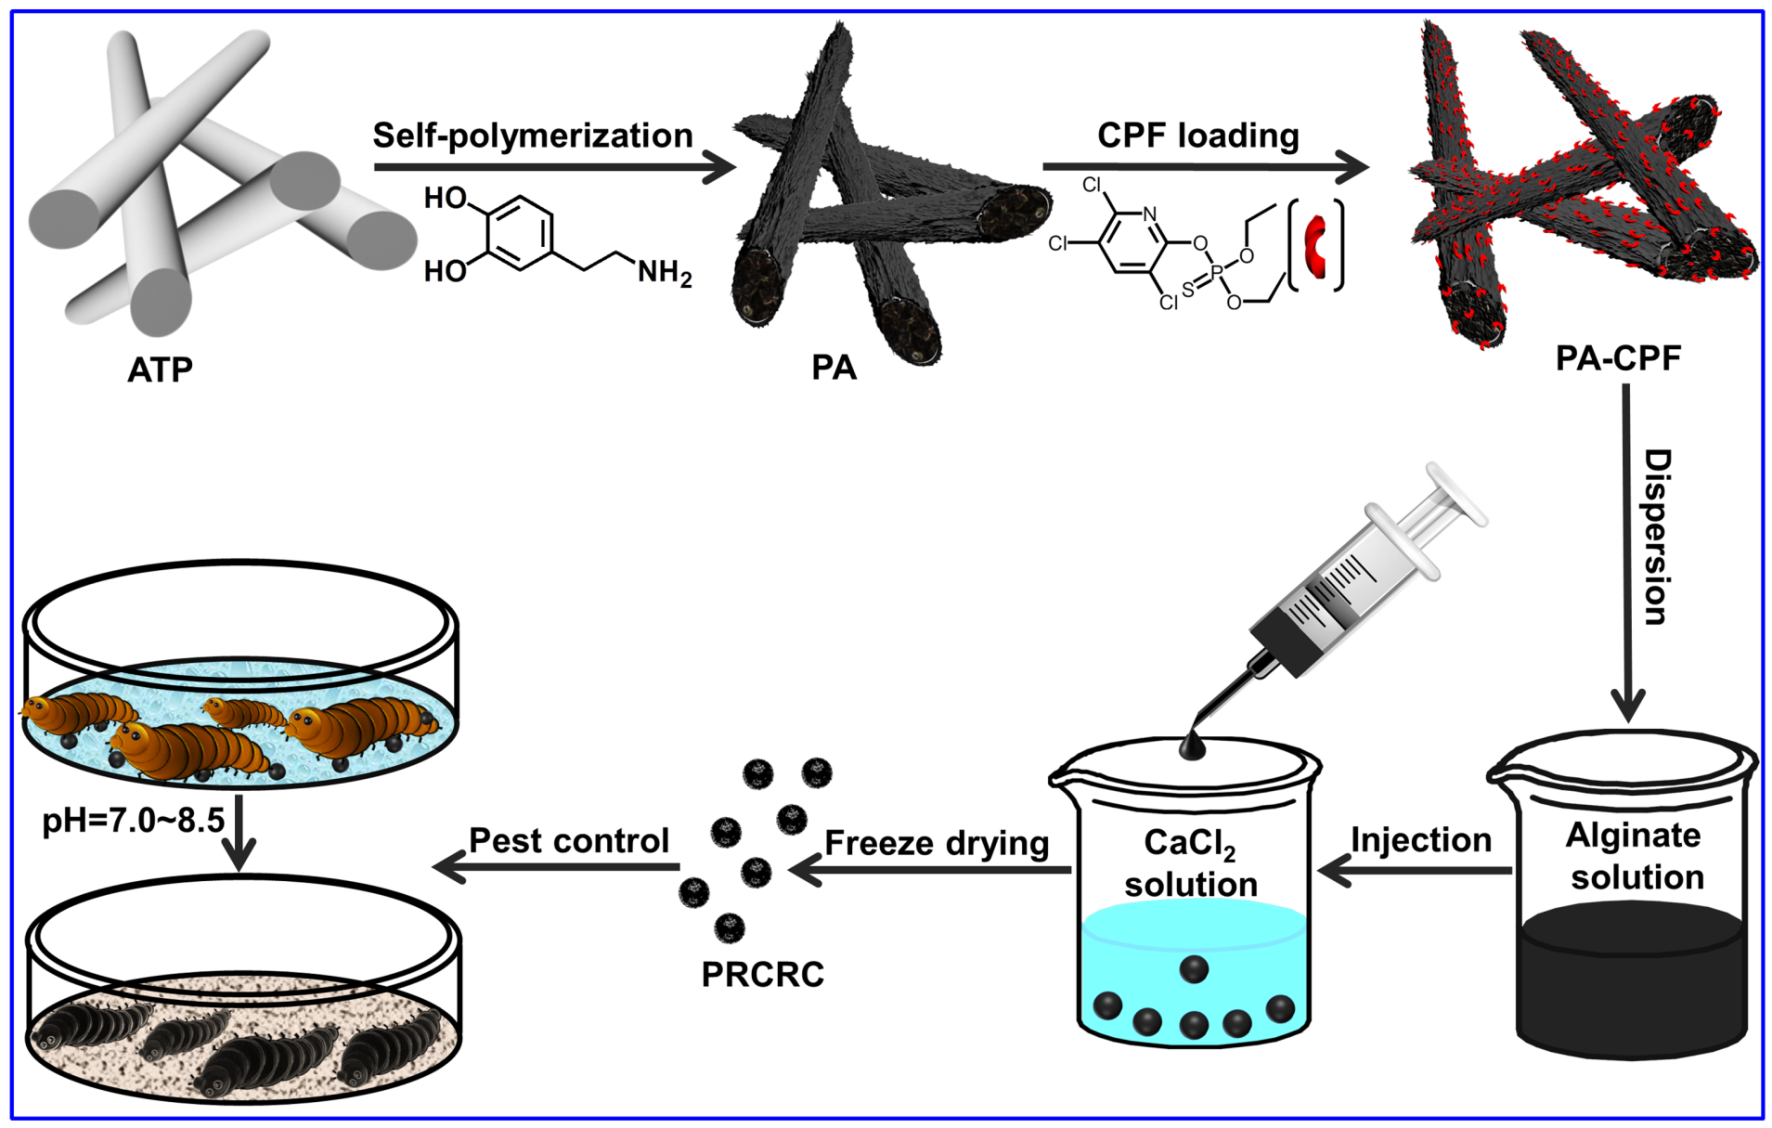 Attapulgite-based Hydrogel to Develop a PH-responsively Controlled-release Pesticide